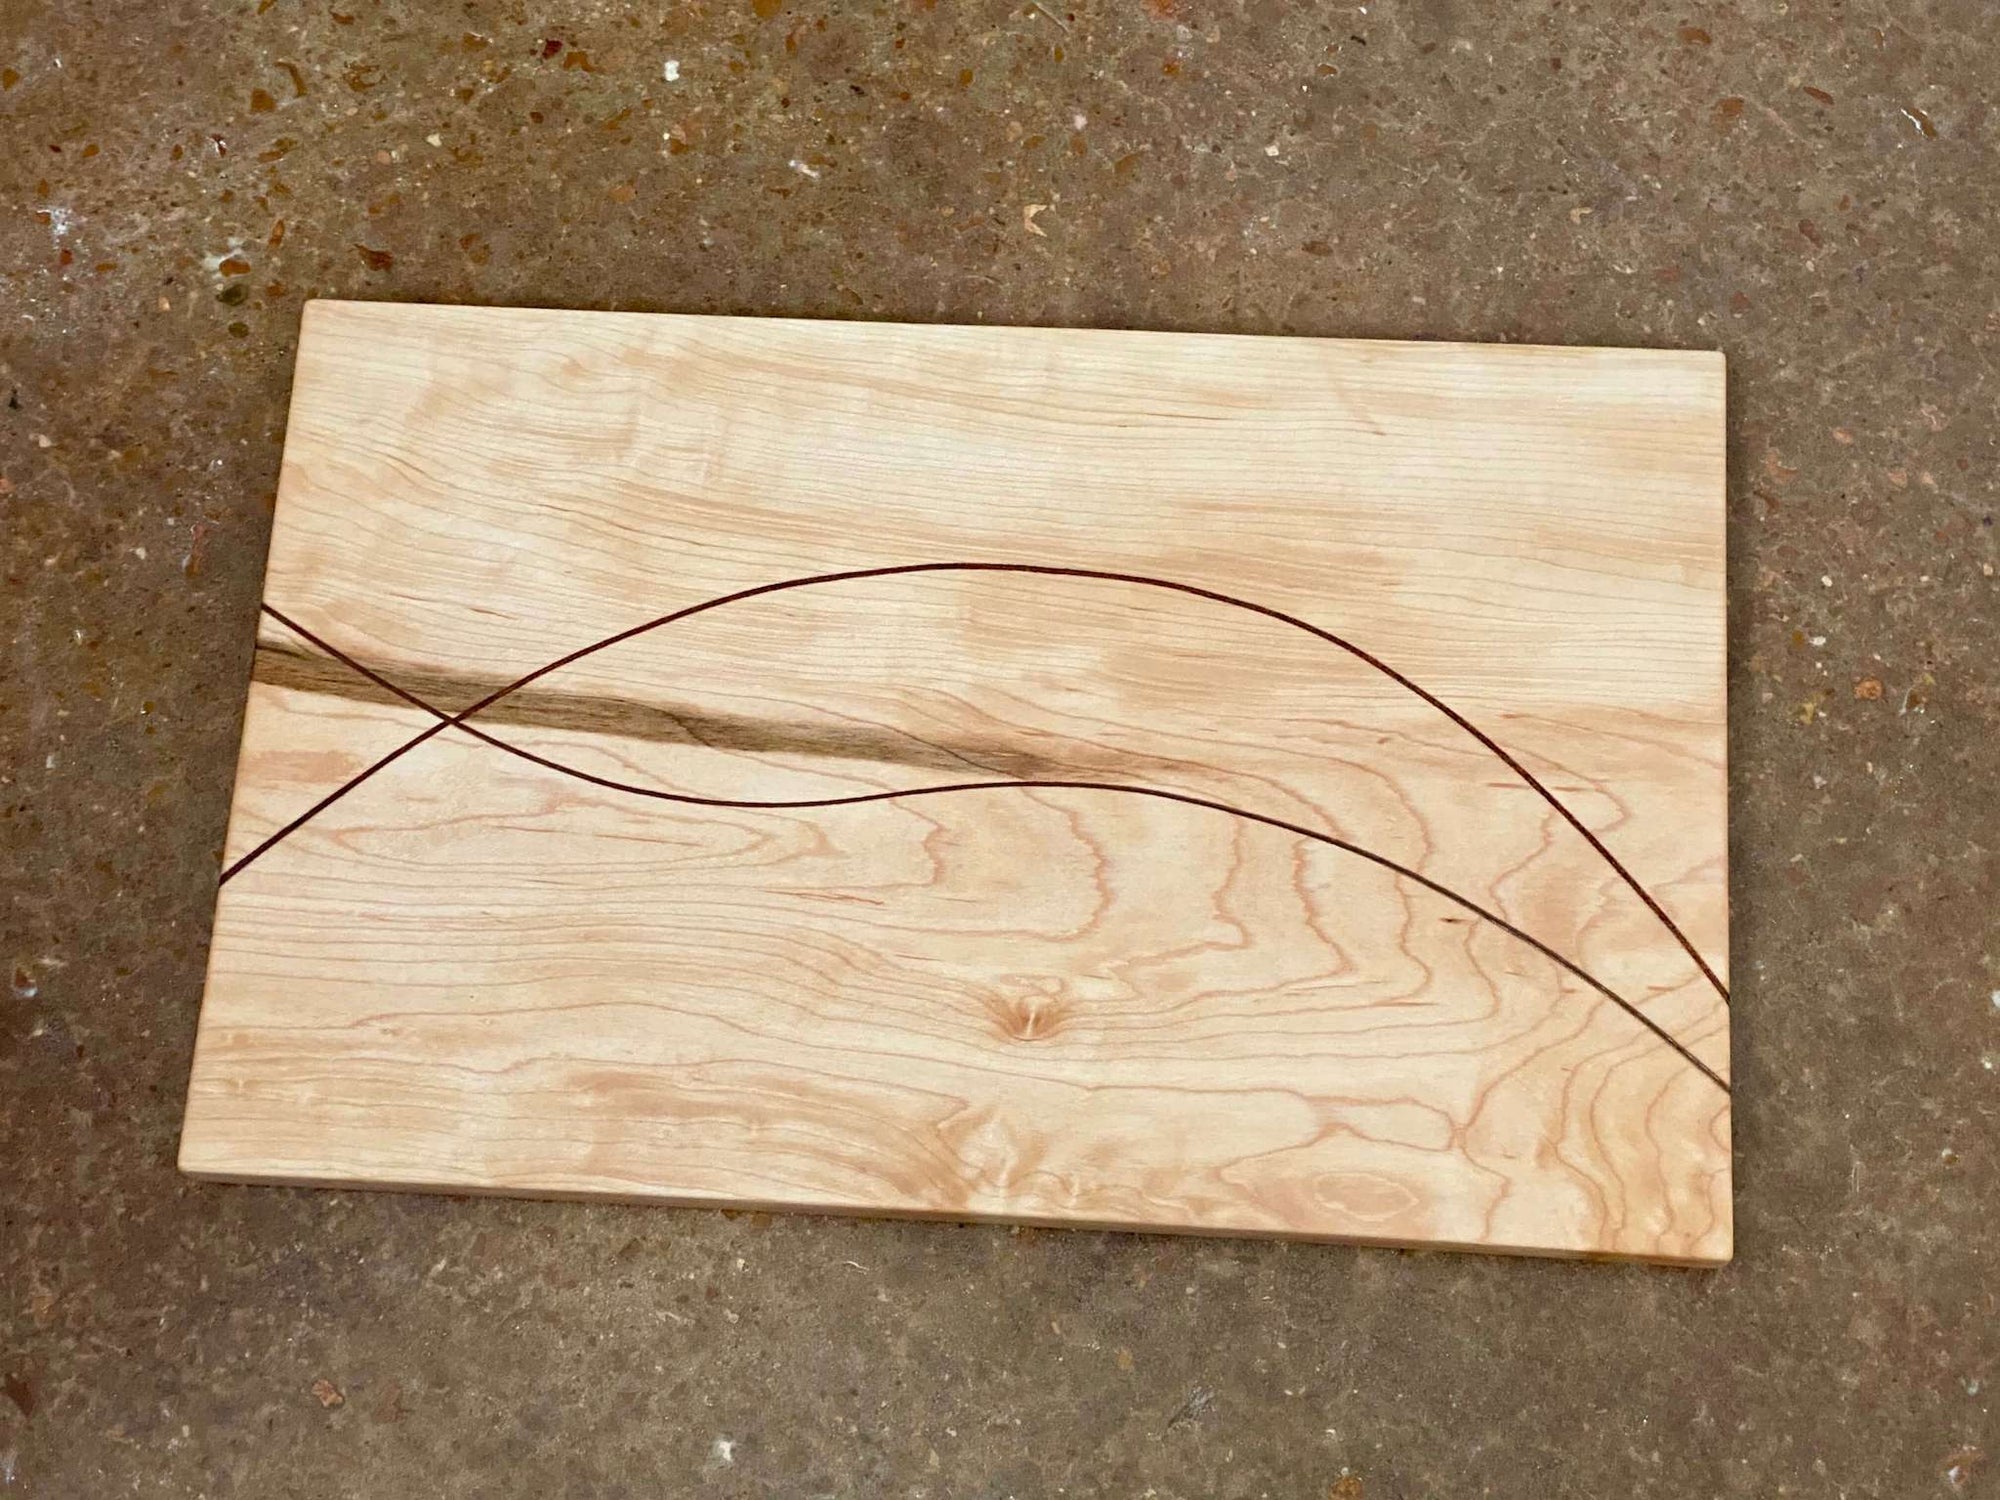 A rectangular cutting and serving board made of maple with two thin lines of walnut curving and intersecting through it.